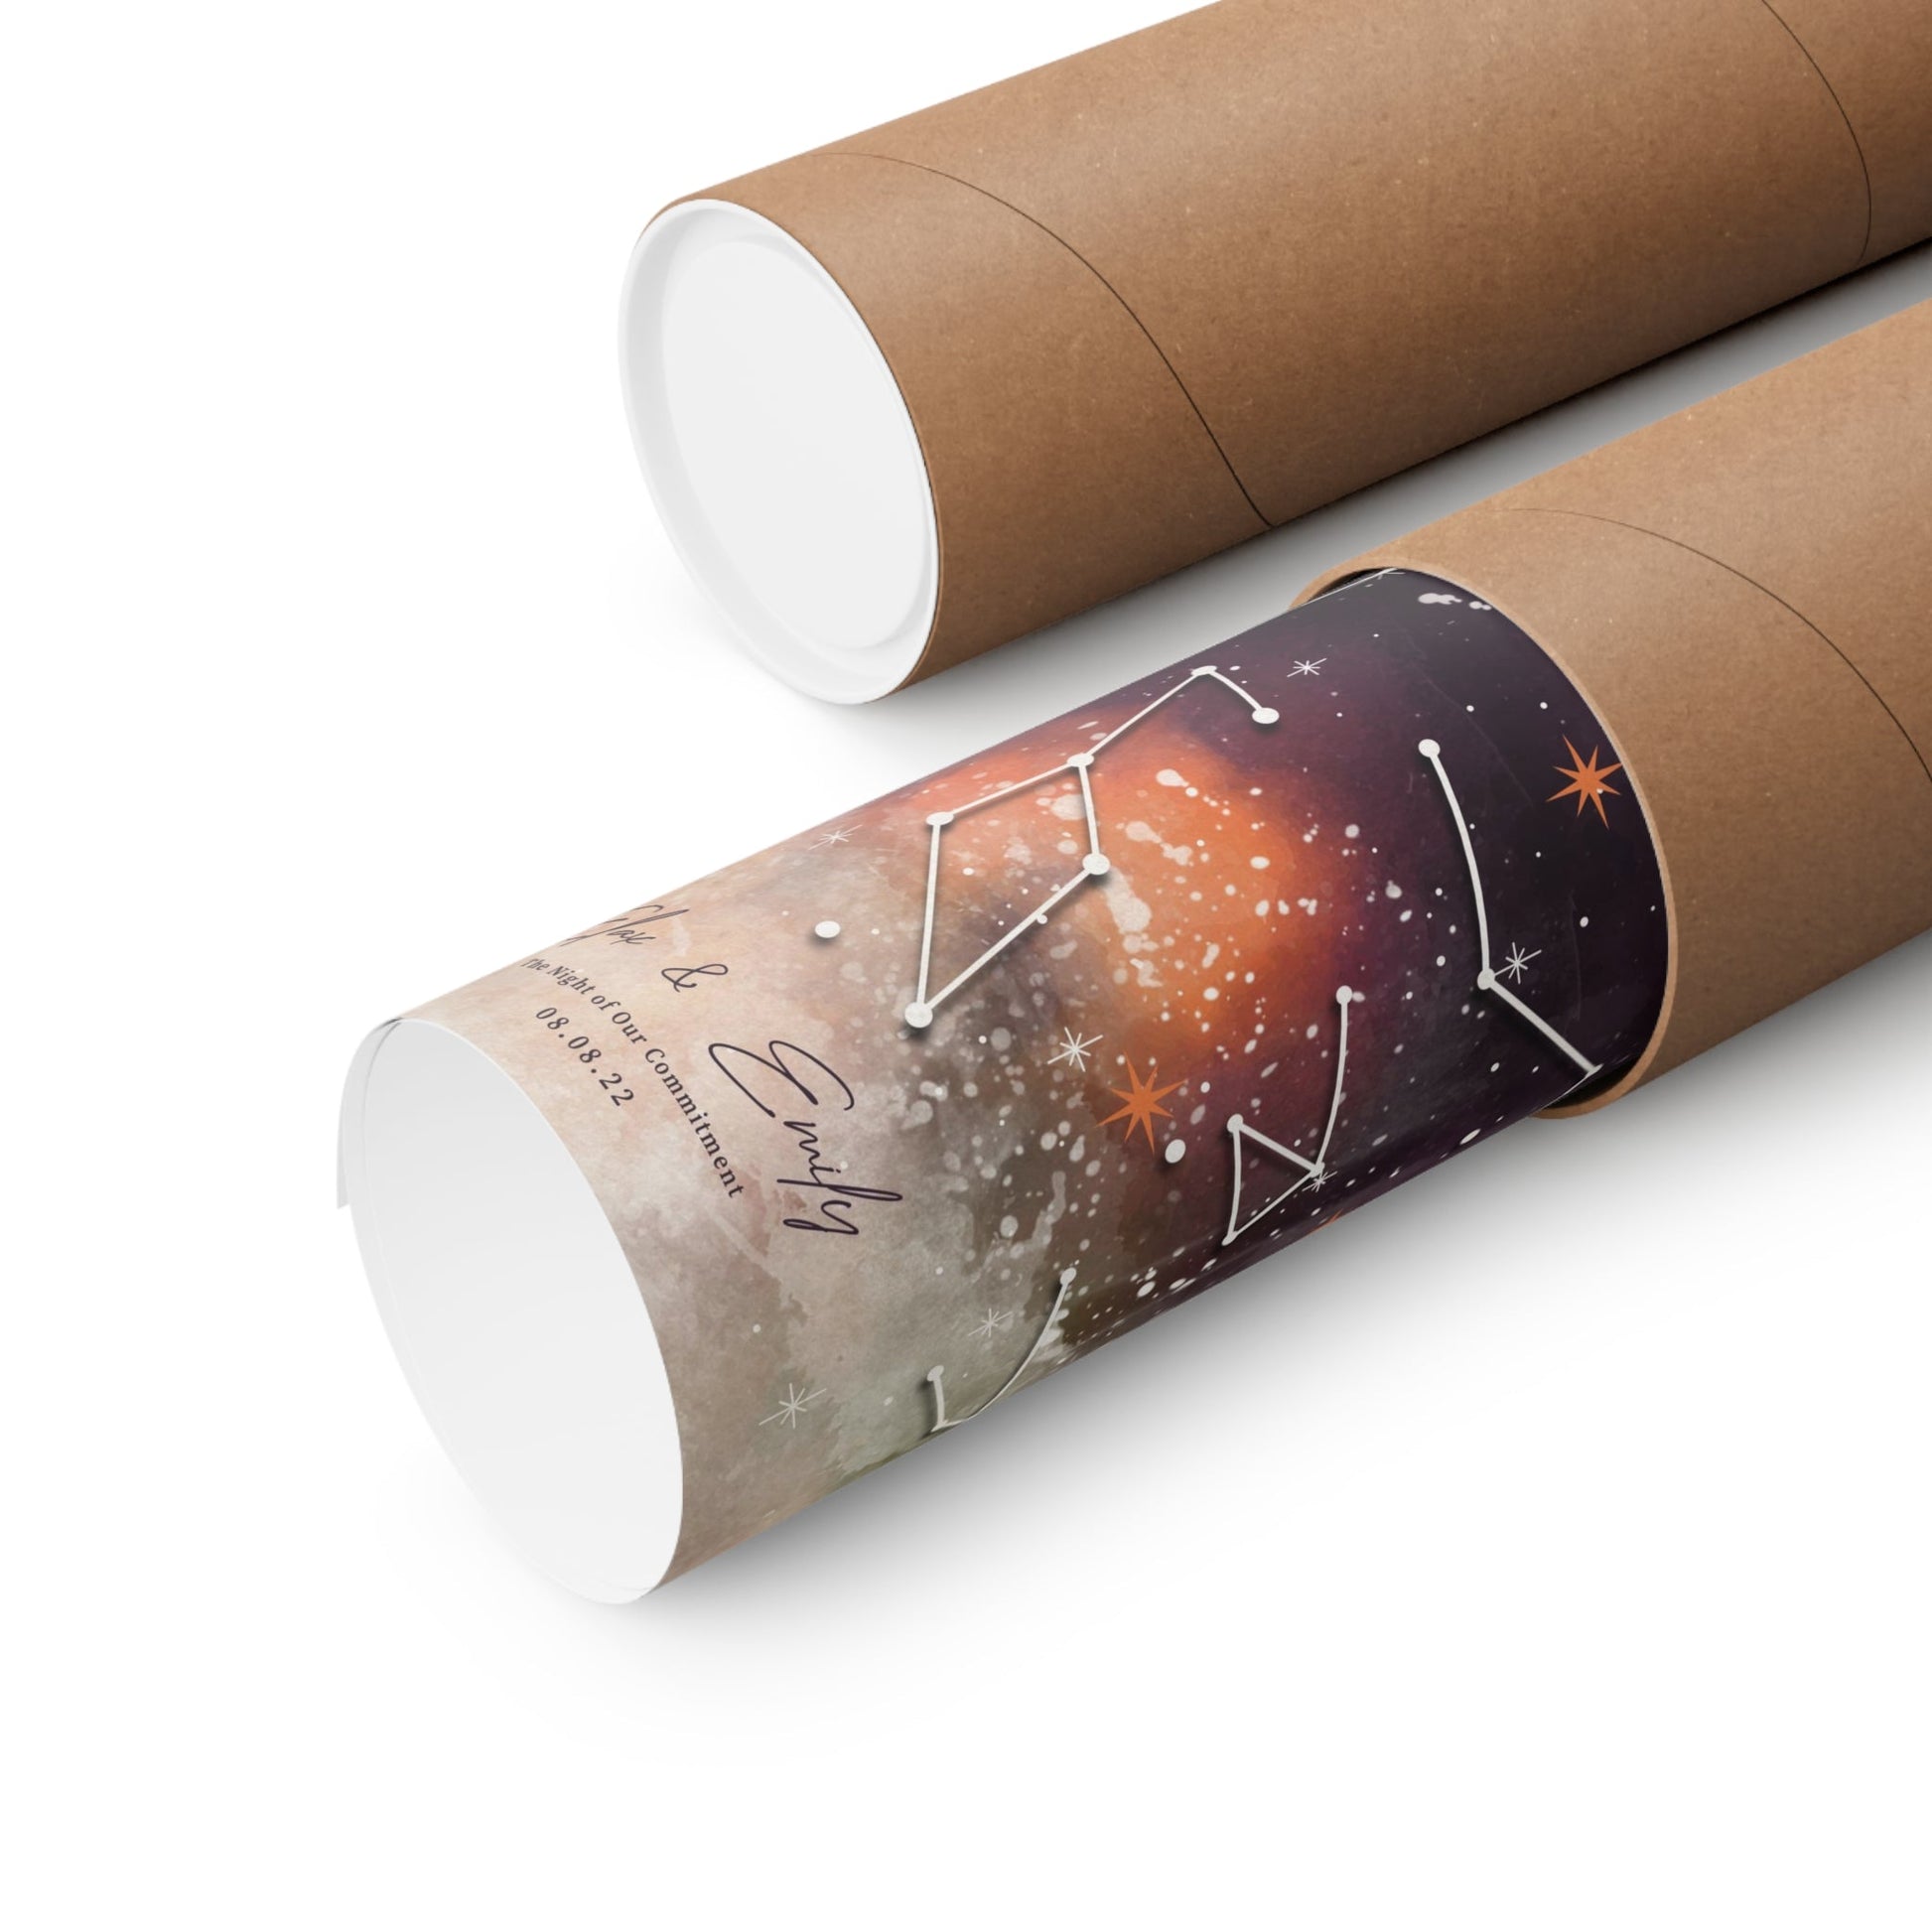 Personalized star map on rolled canvas, capturing cherished moment in the cosmos.